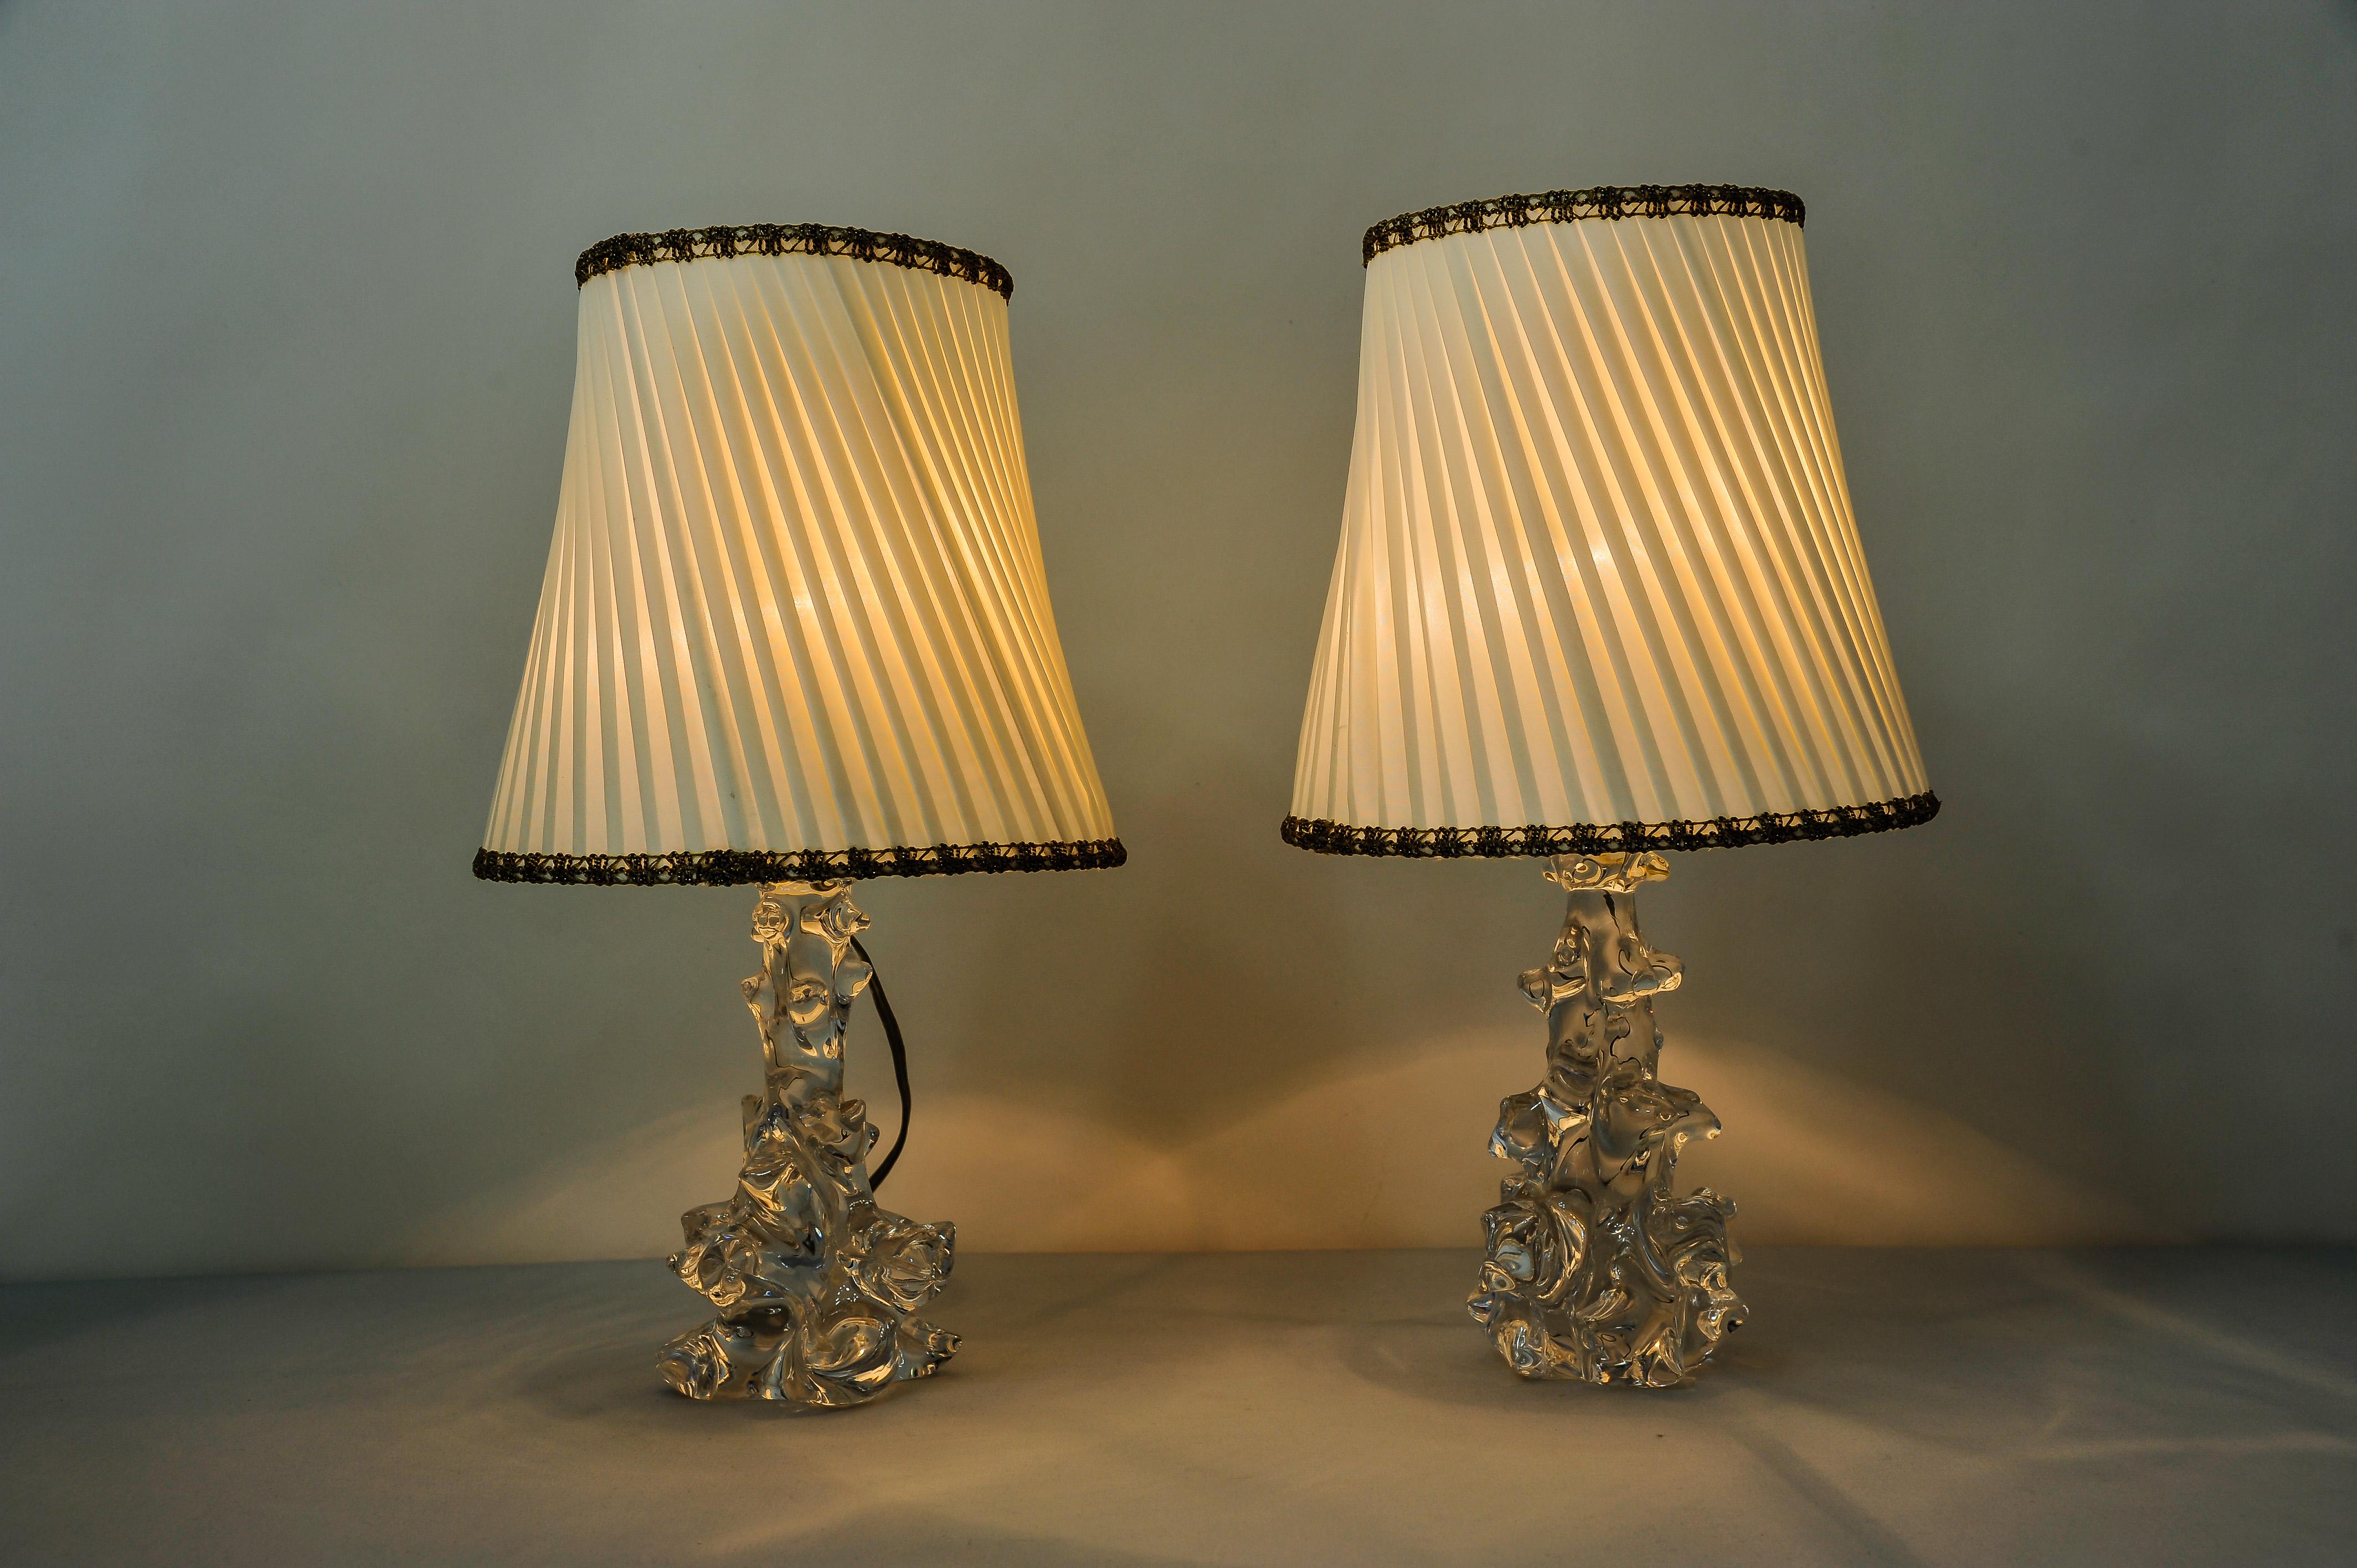 Two Charles Schneider Crystal Glass Table Lamps and Original Fabric Shades 1960s For Sale 2